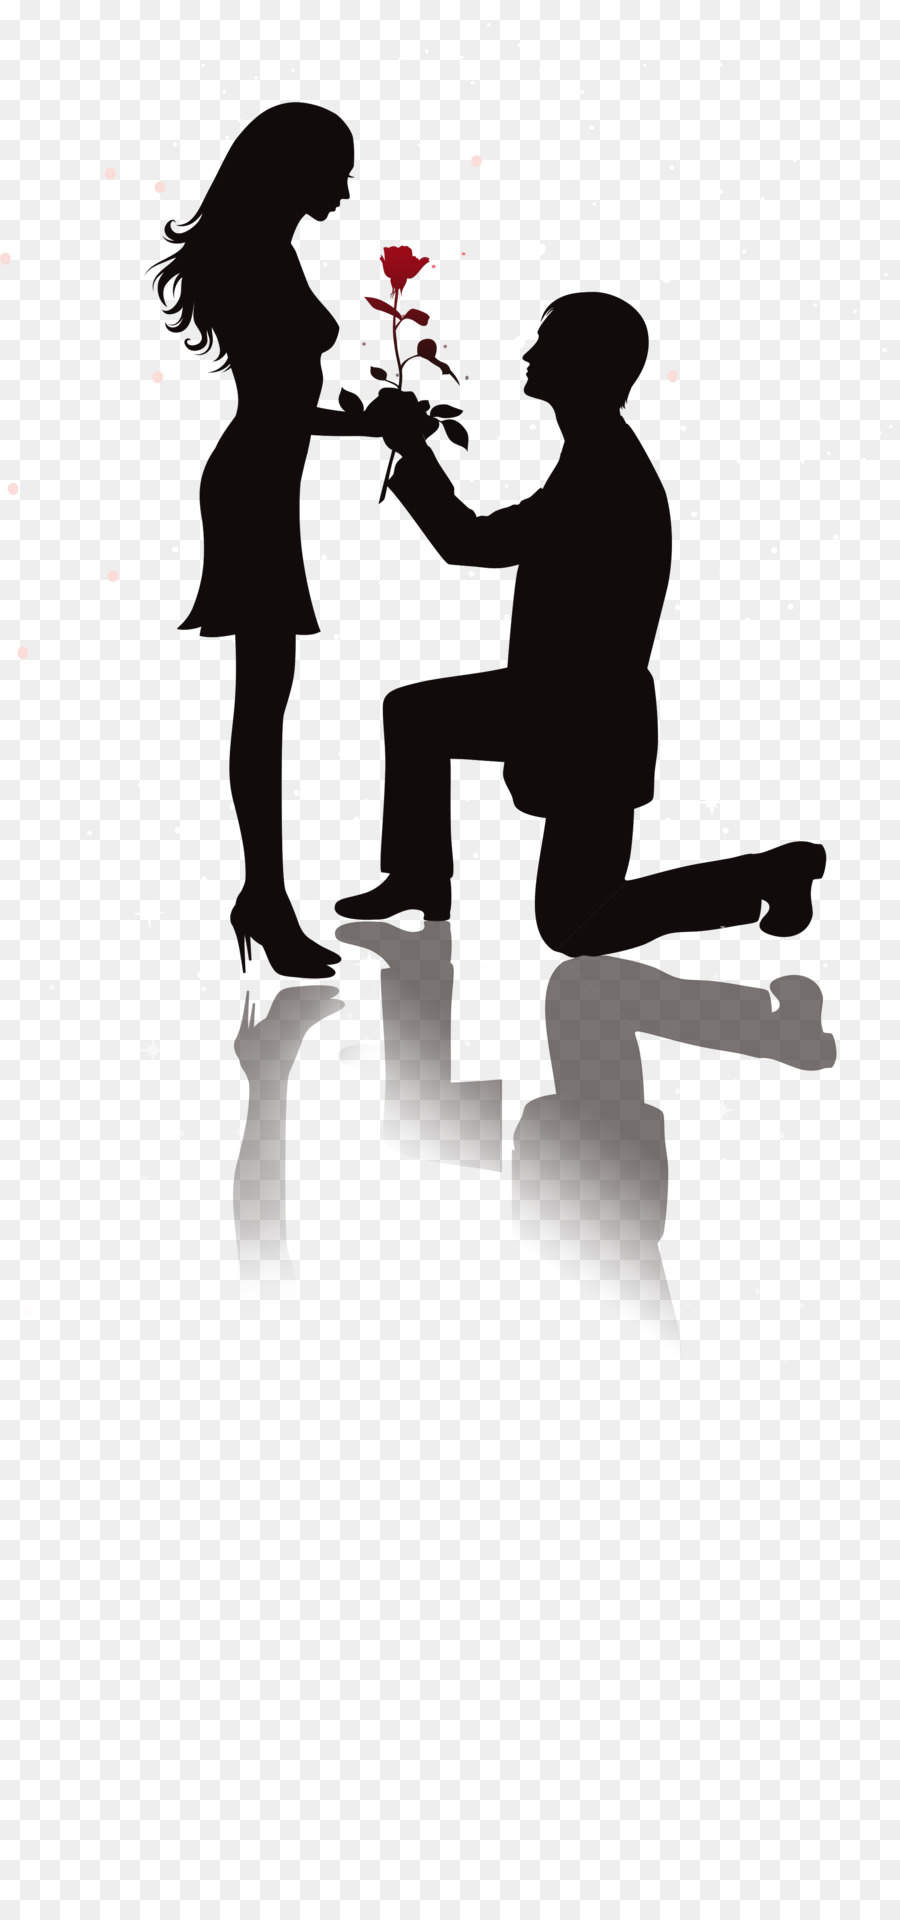 Stencil - Men and women marry men and women png download - 2088*4414 - Free Transparent Stencil png Download.